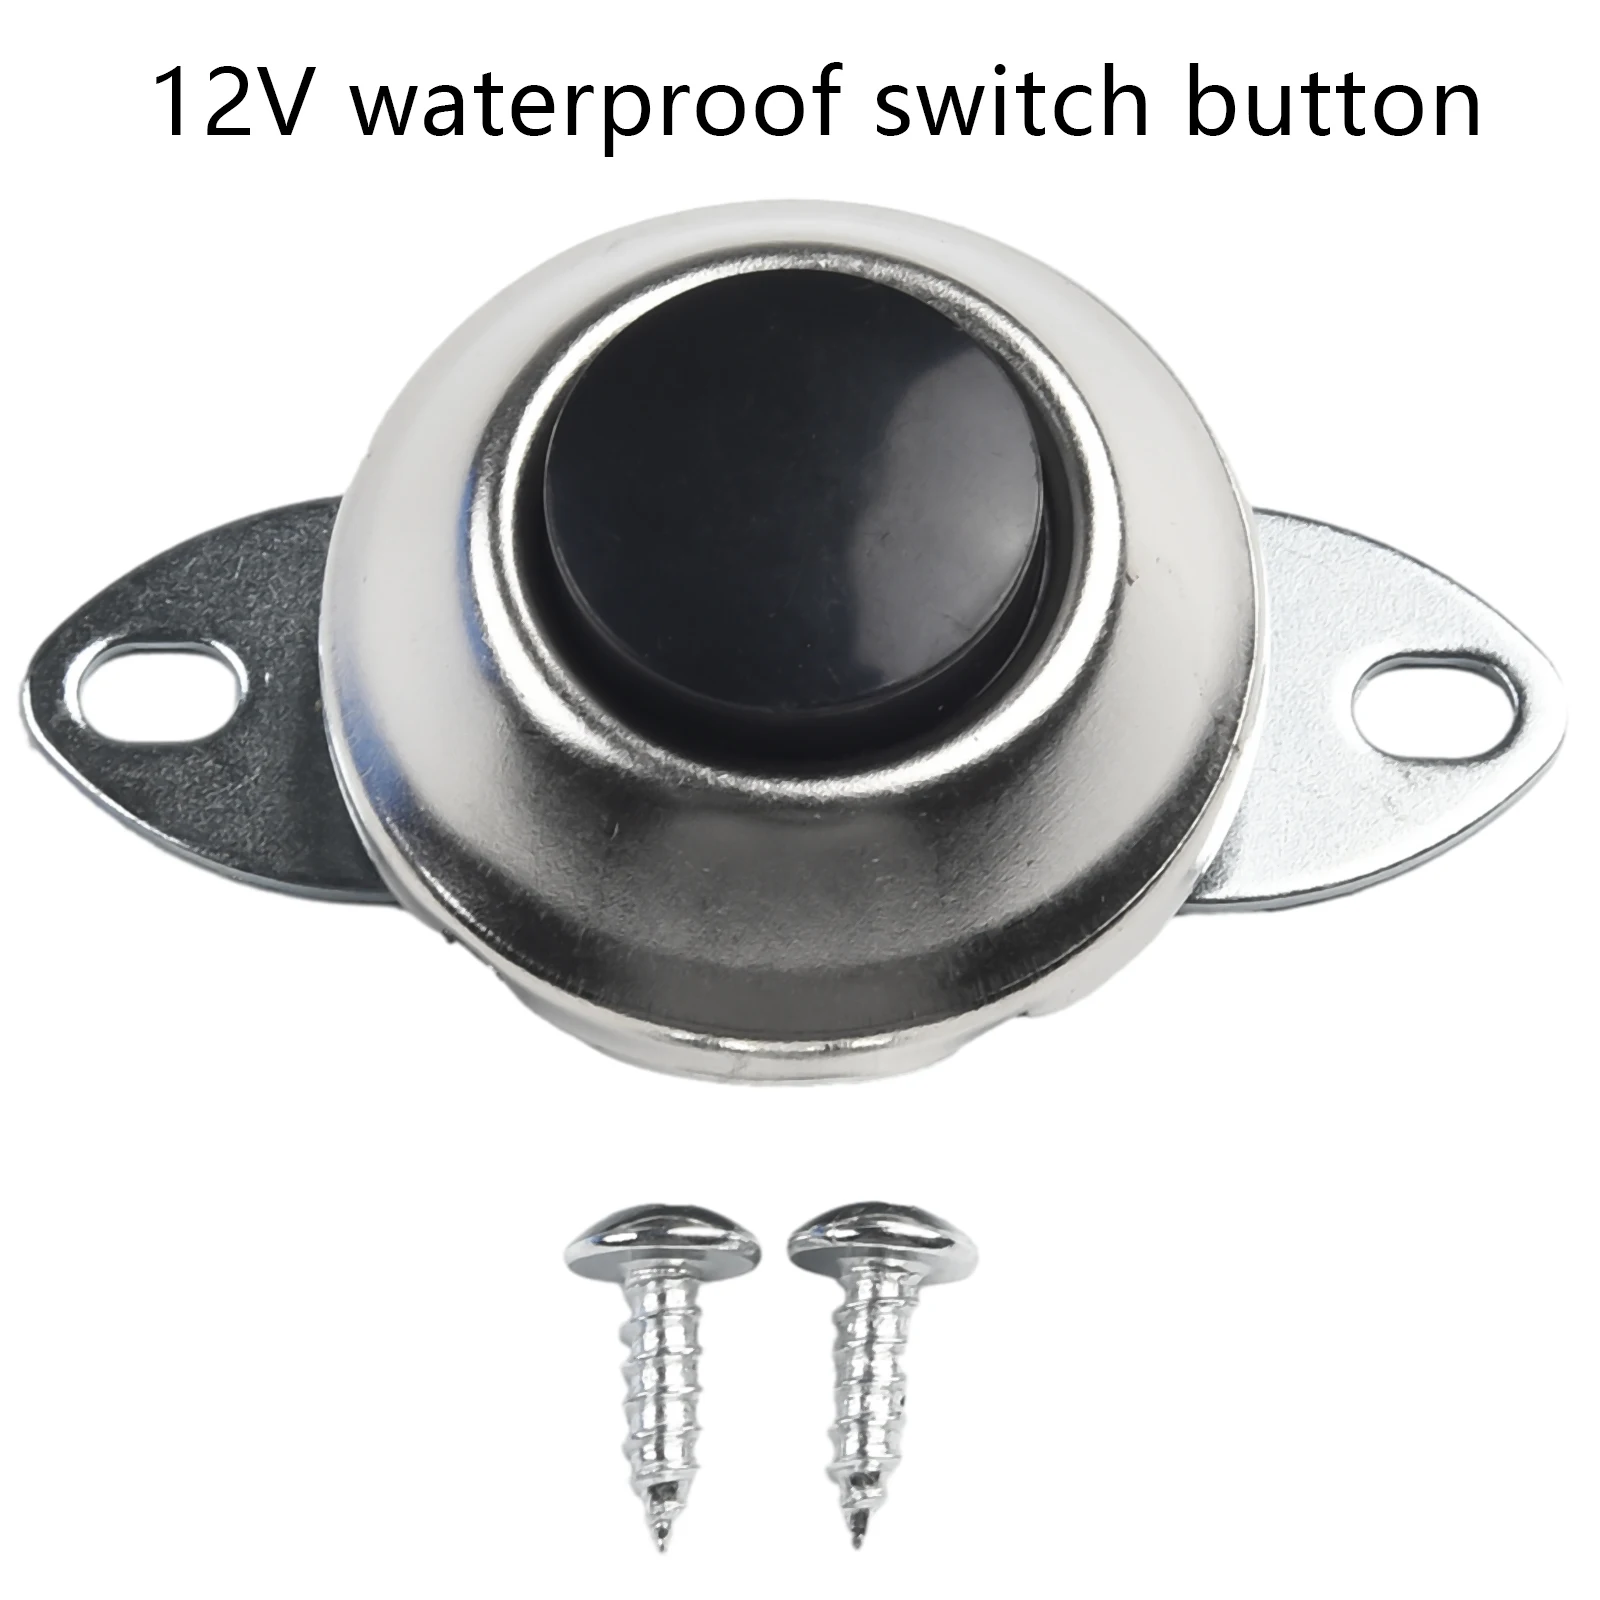 12V/24V Waterproof Switch Push Button Car Boat Track Horn Engine Switch Button Universal Auto Replacement Interior Parts